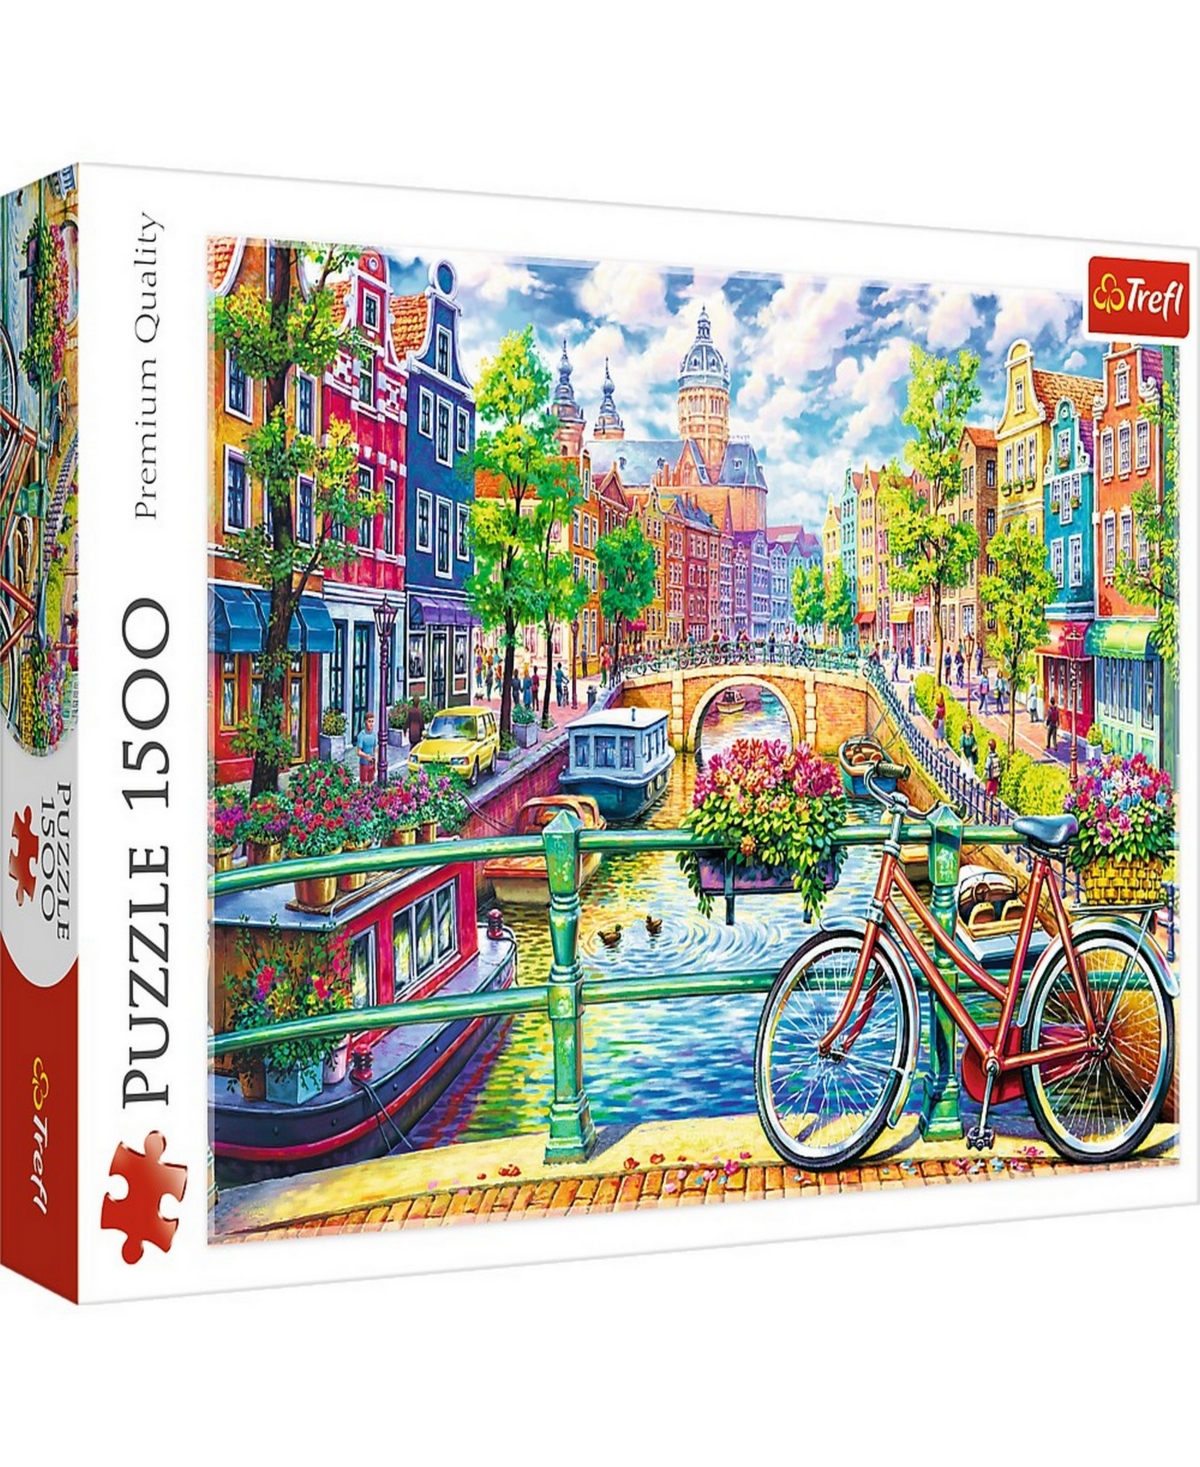 Trefl Kids' Jigsaw Puzzle Amsterdam Canal, 1500 Pieces In Multicolor